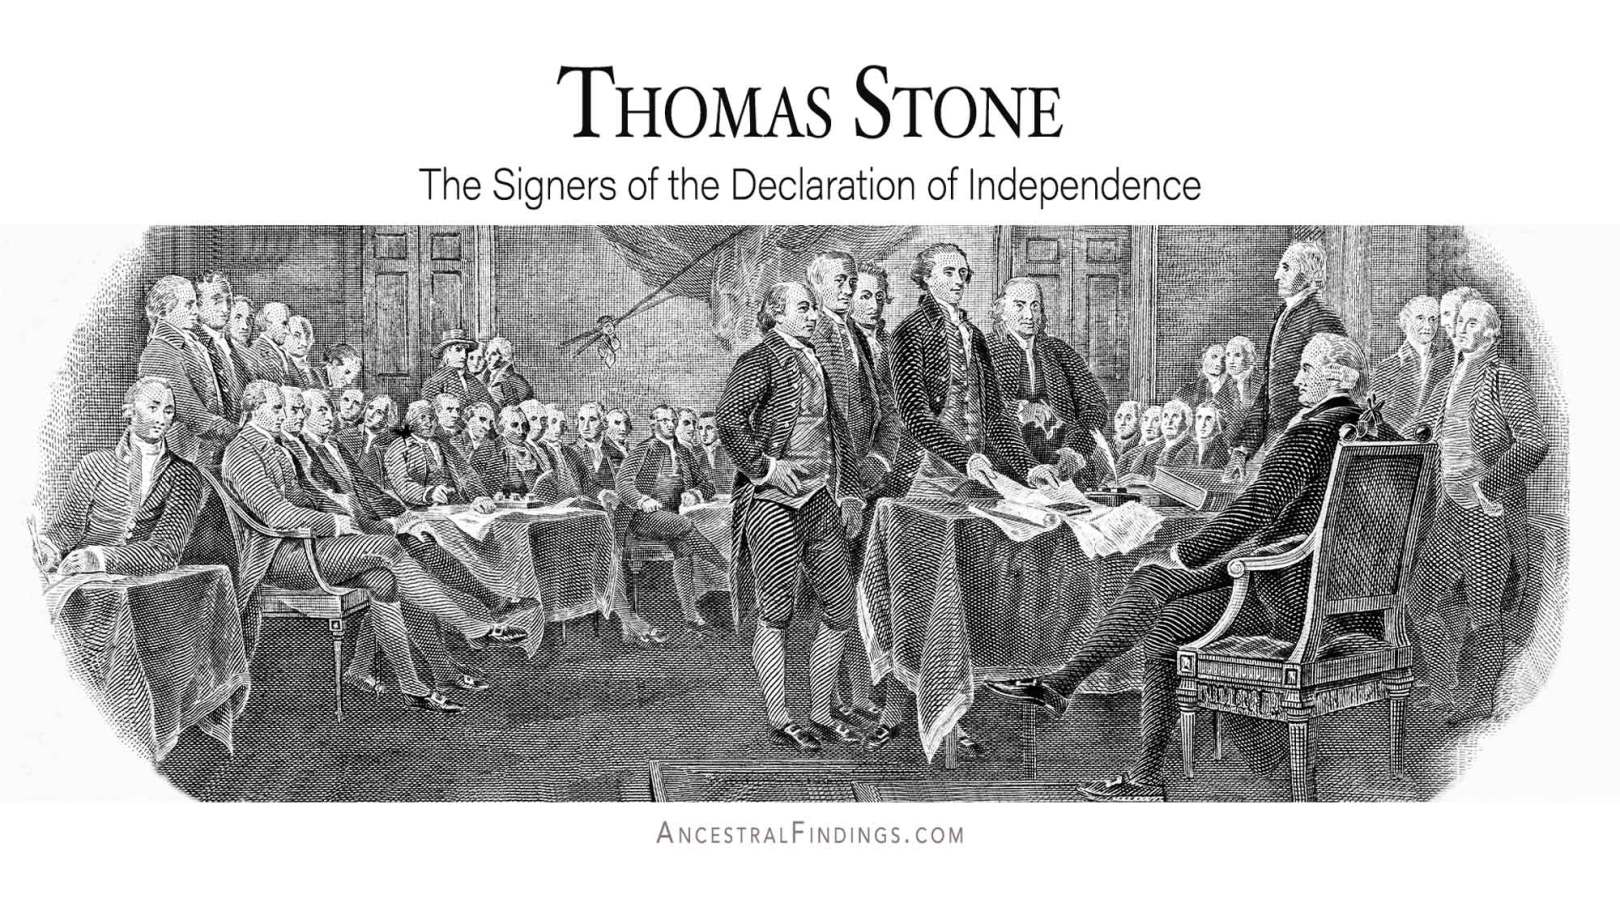 Thomas Stone: The Signers of the Declaration of Independence